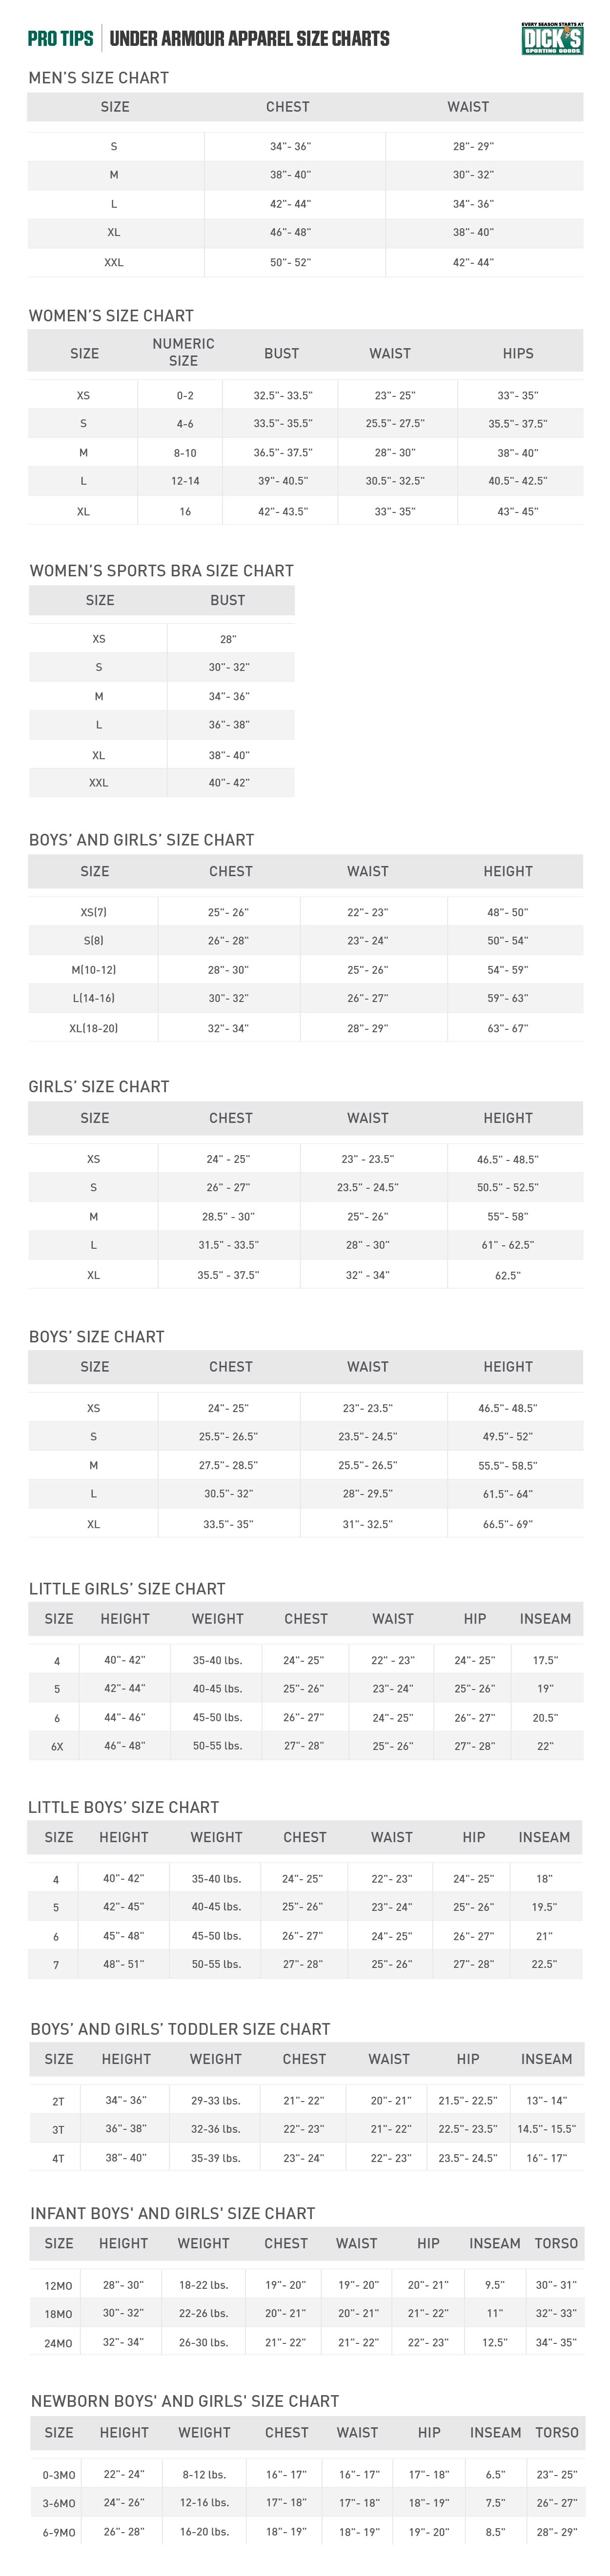 Under Armour® Apparel Size Charts | PRO 